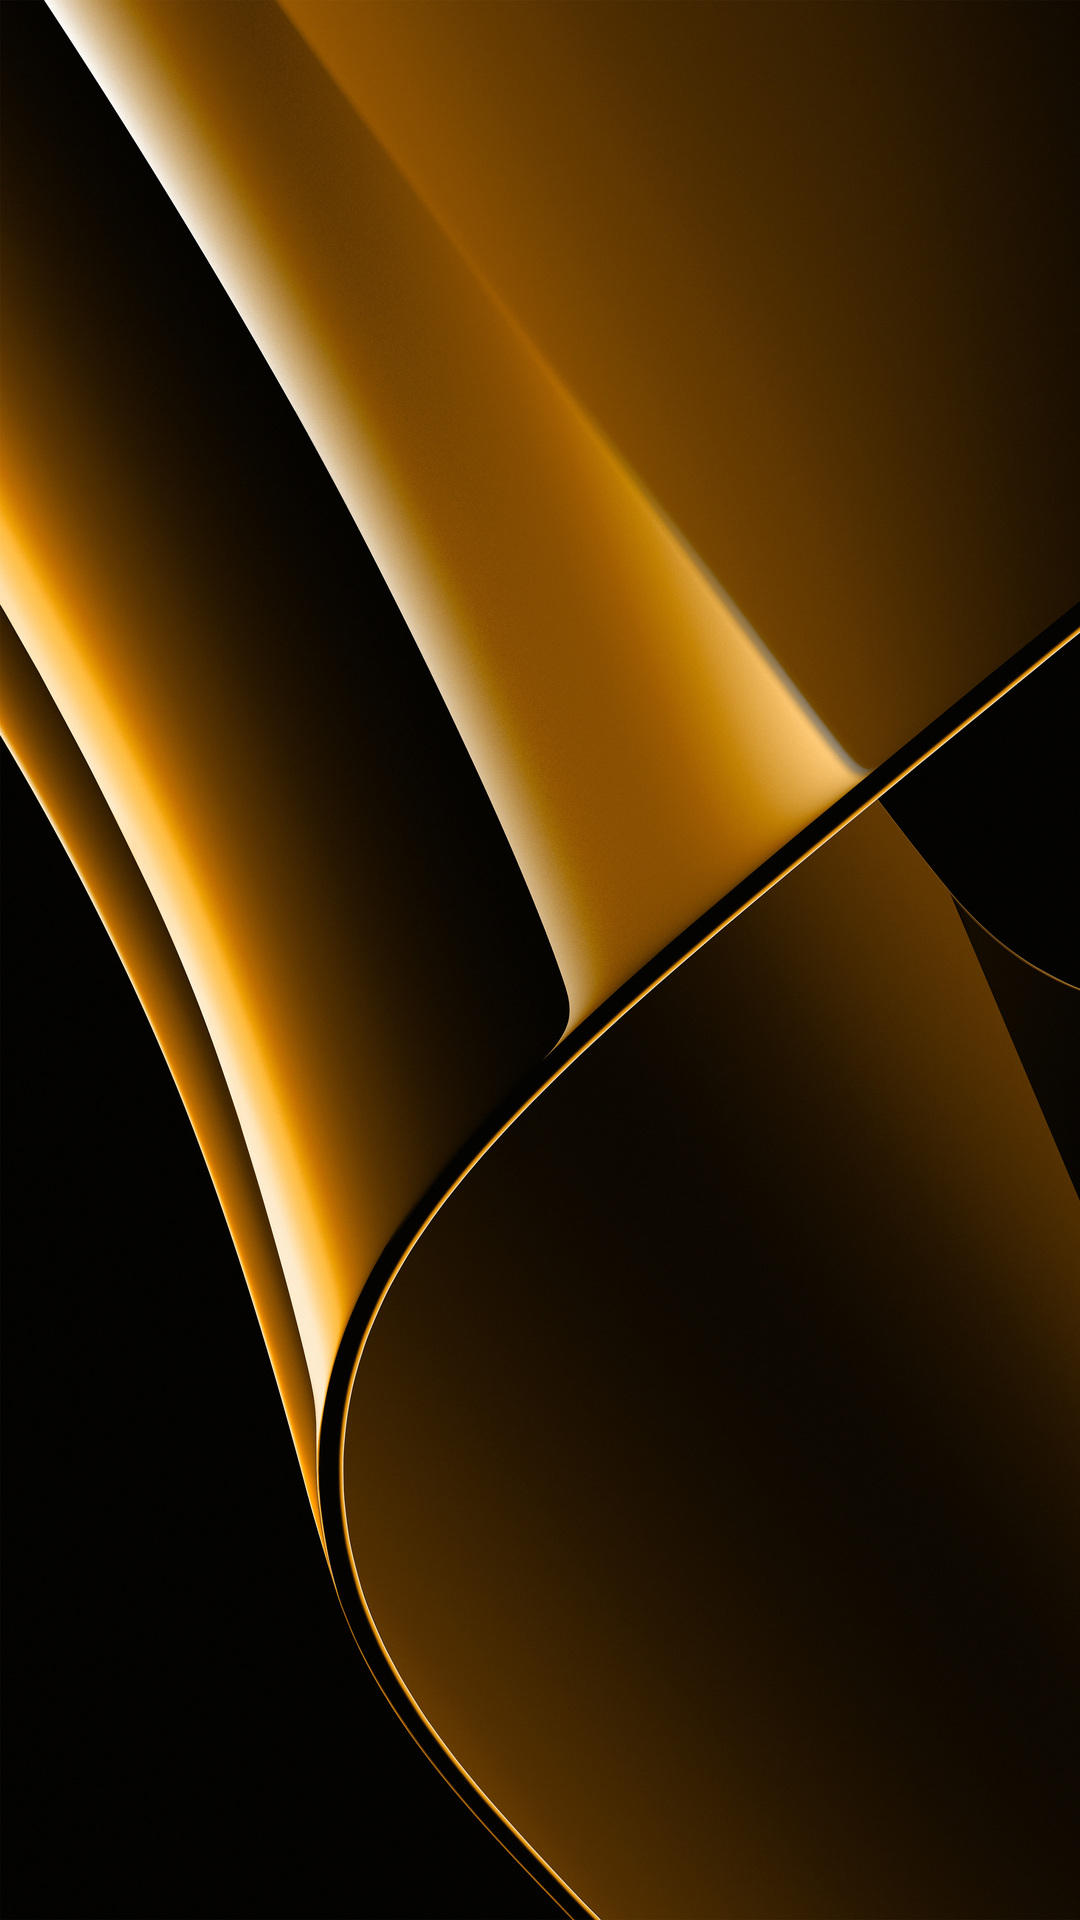 1080x1920 Gold Abstract 5k Iphone 7,6s,6 Plus, Pixel xl ,One Plus 3,3t ...